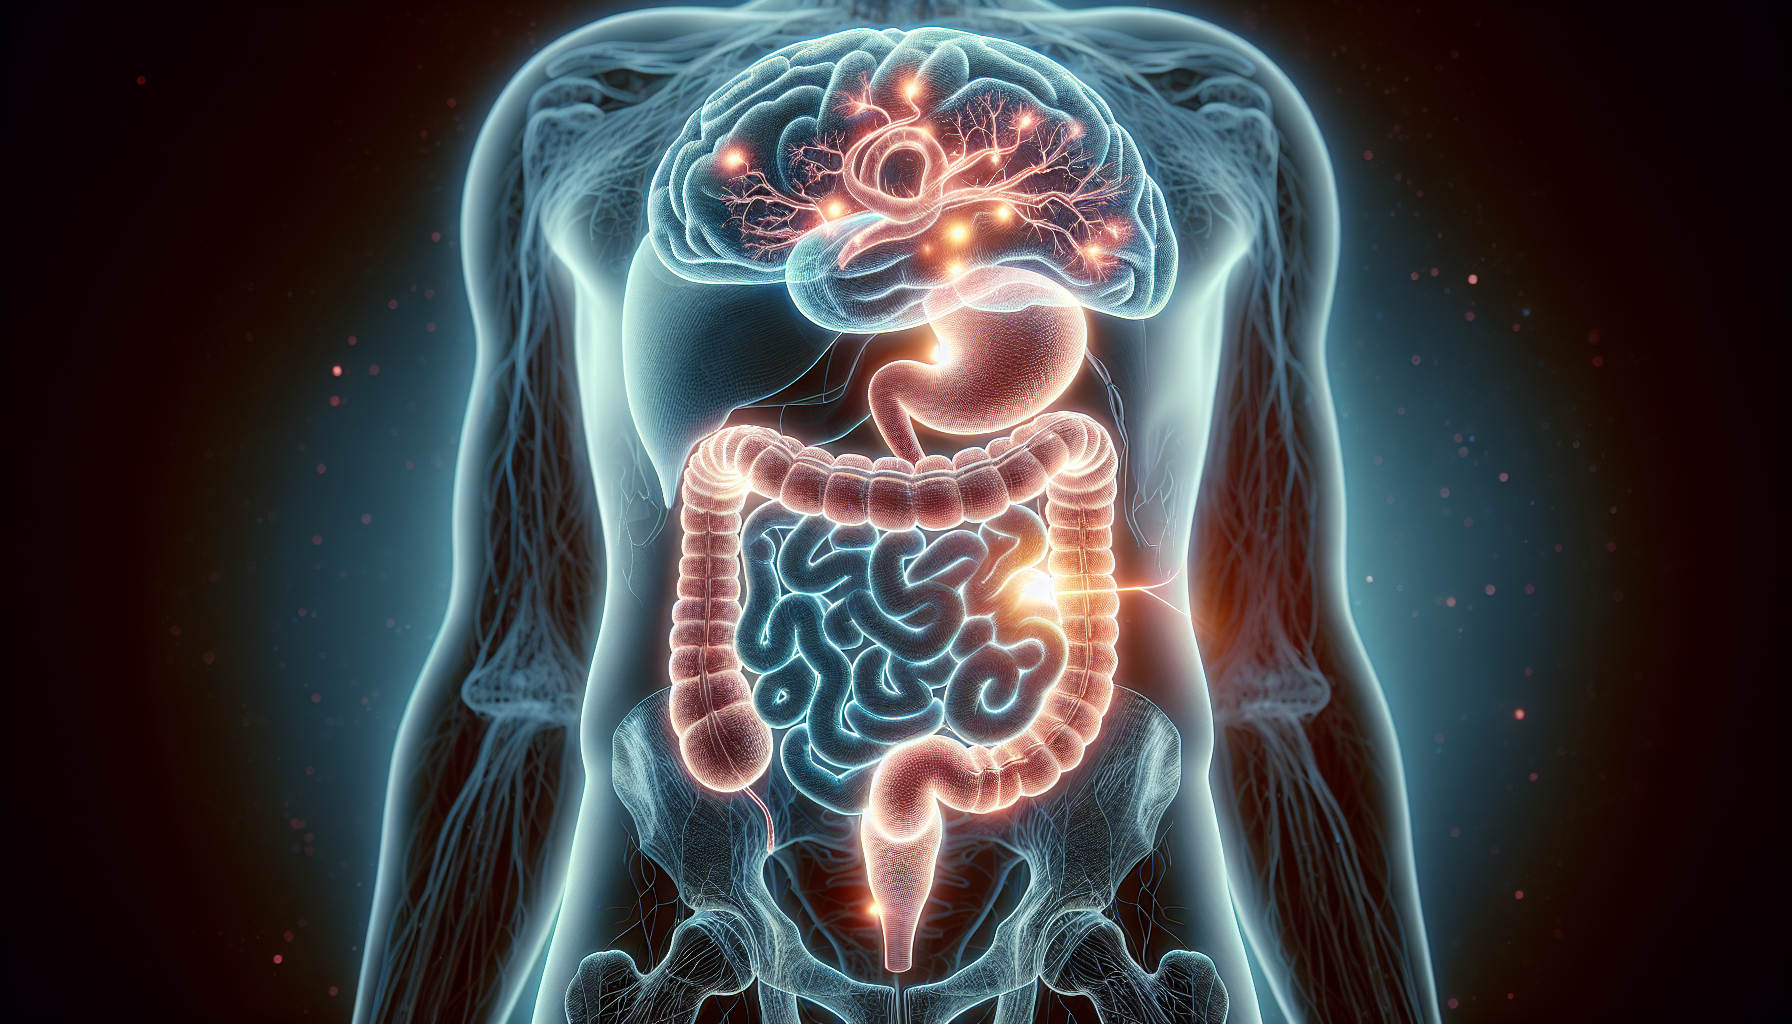 Illustration of a gastrointestinal system with root causes of nausea highlighted